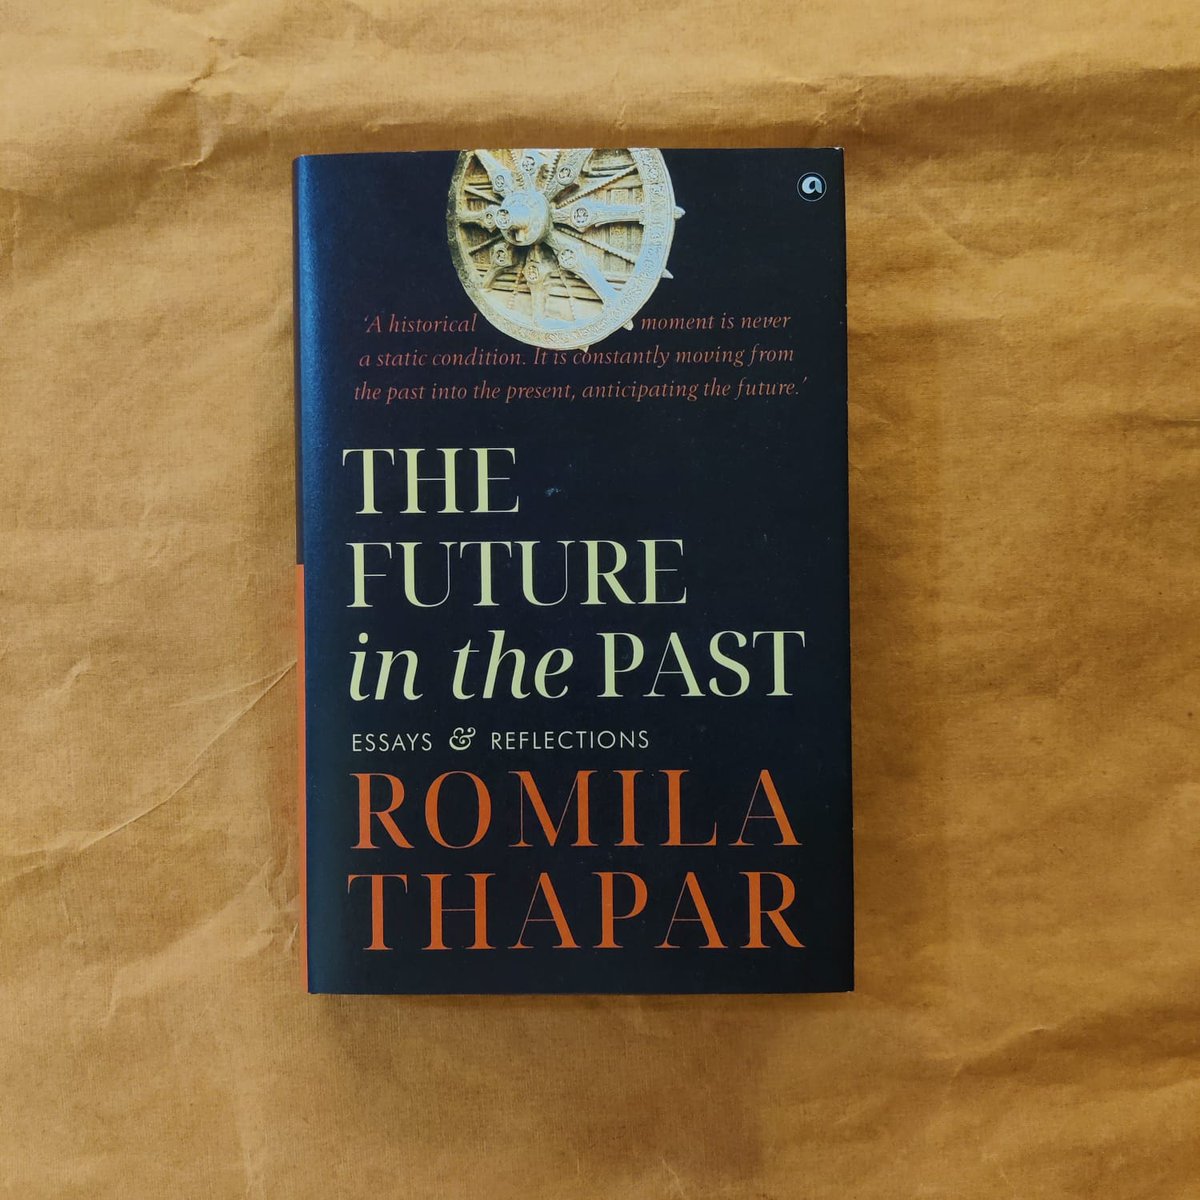 #TheFutureInThePast is a compelling collection of essays by Romila Thapar, covering diverse topics such as the misuse of history, Aryan migration myths, religious fundamentalism, cultural distortions, and the significance of dissent.